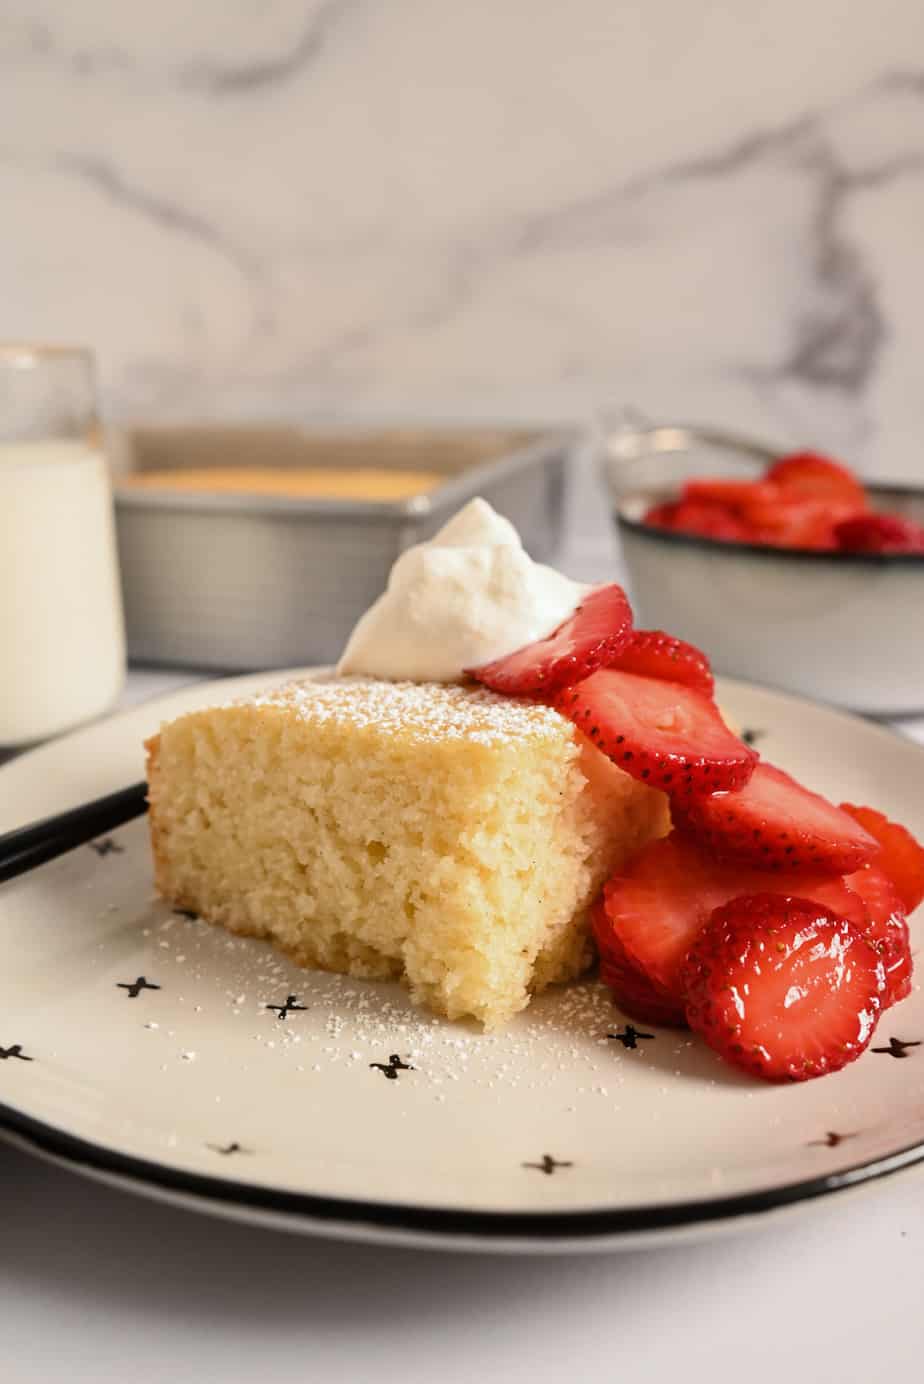 Slice of homemade yellow cake on a white and black plate, topped with strawberries and whipped cream.